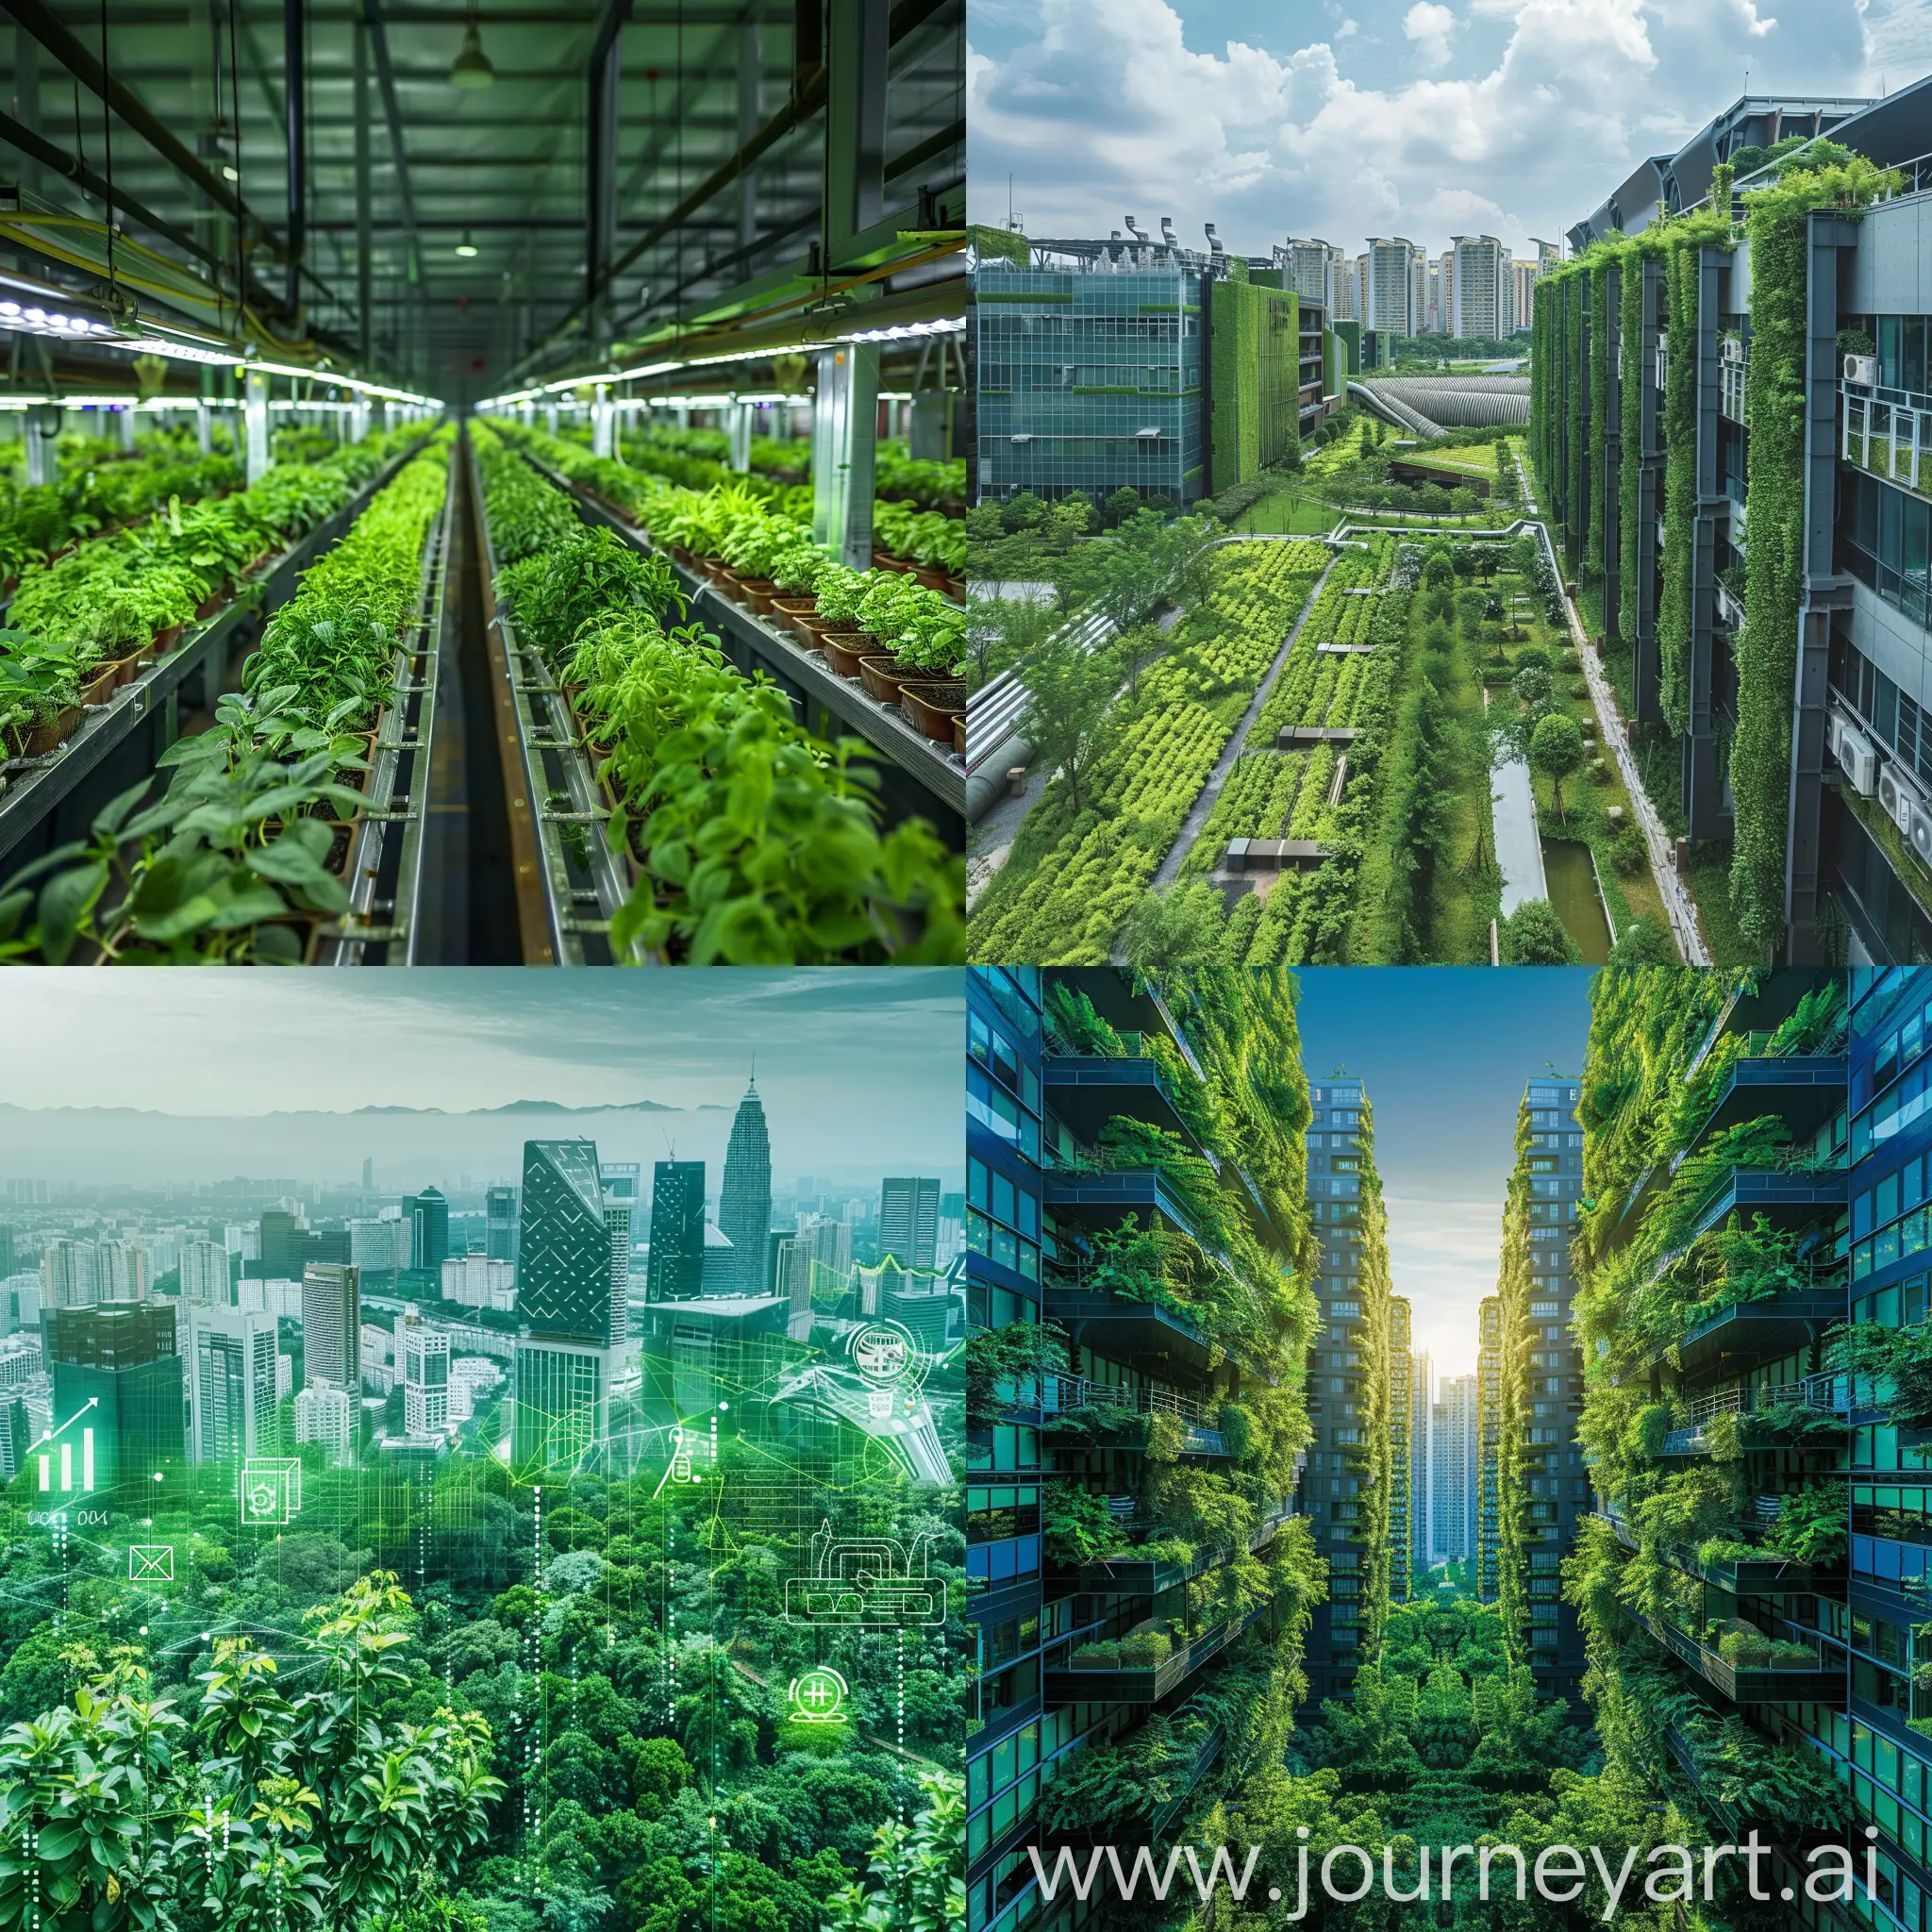 Industries with greenery all around, digitisation and automation, infrastructure development.